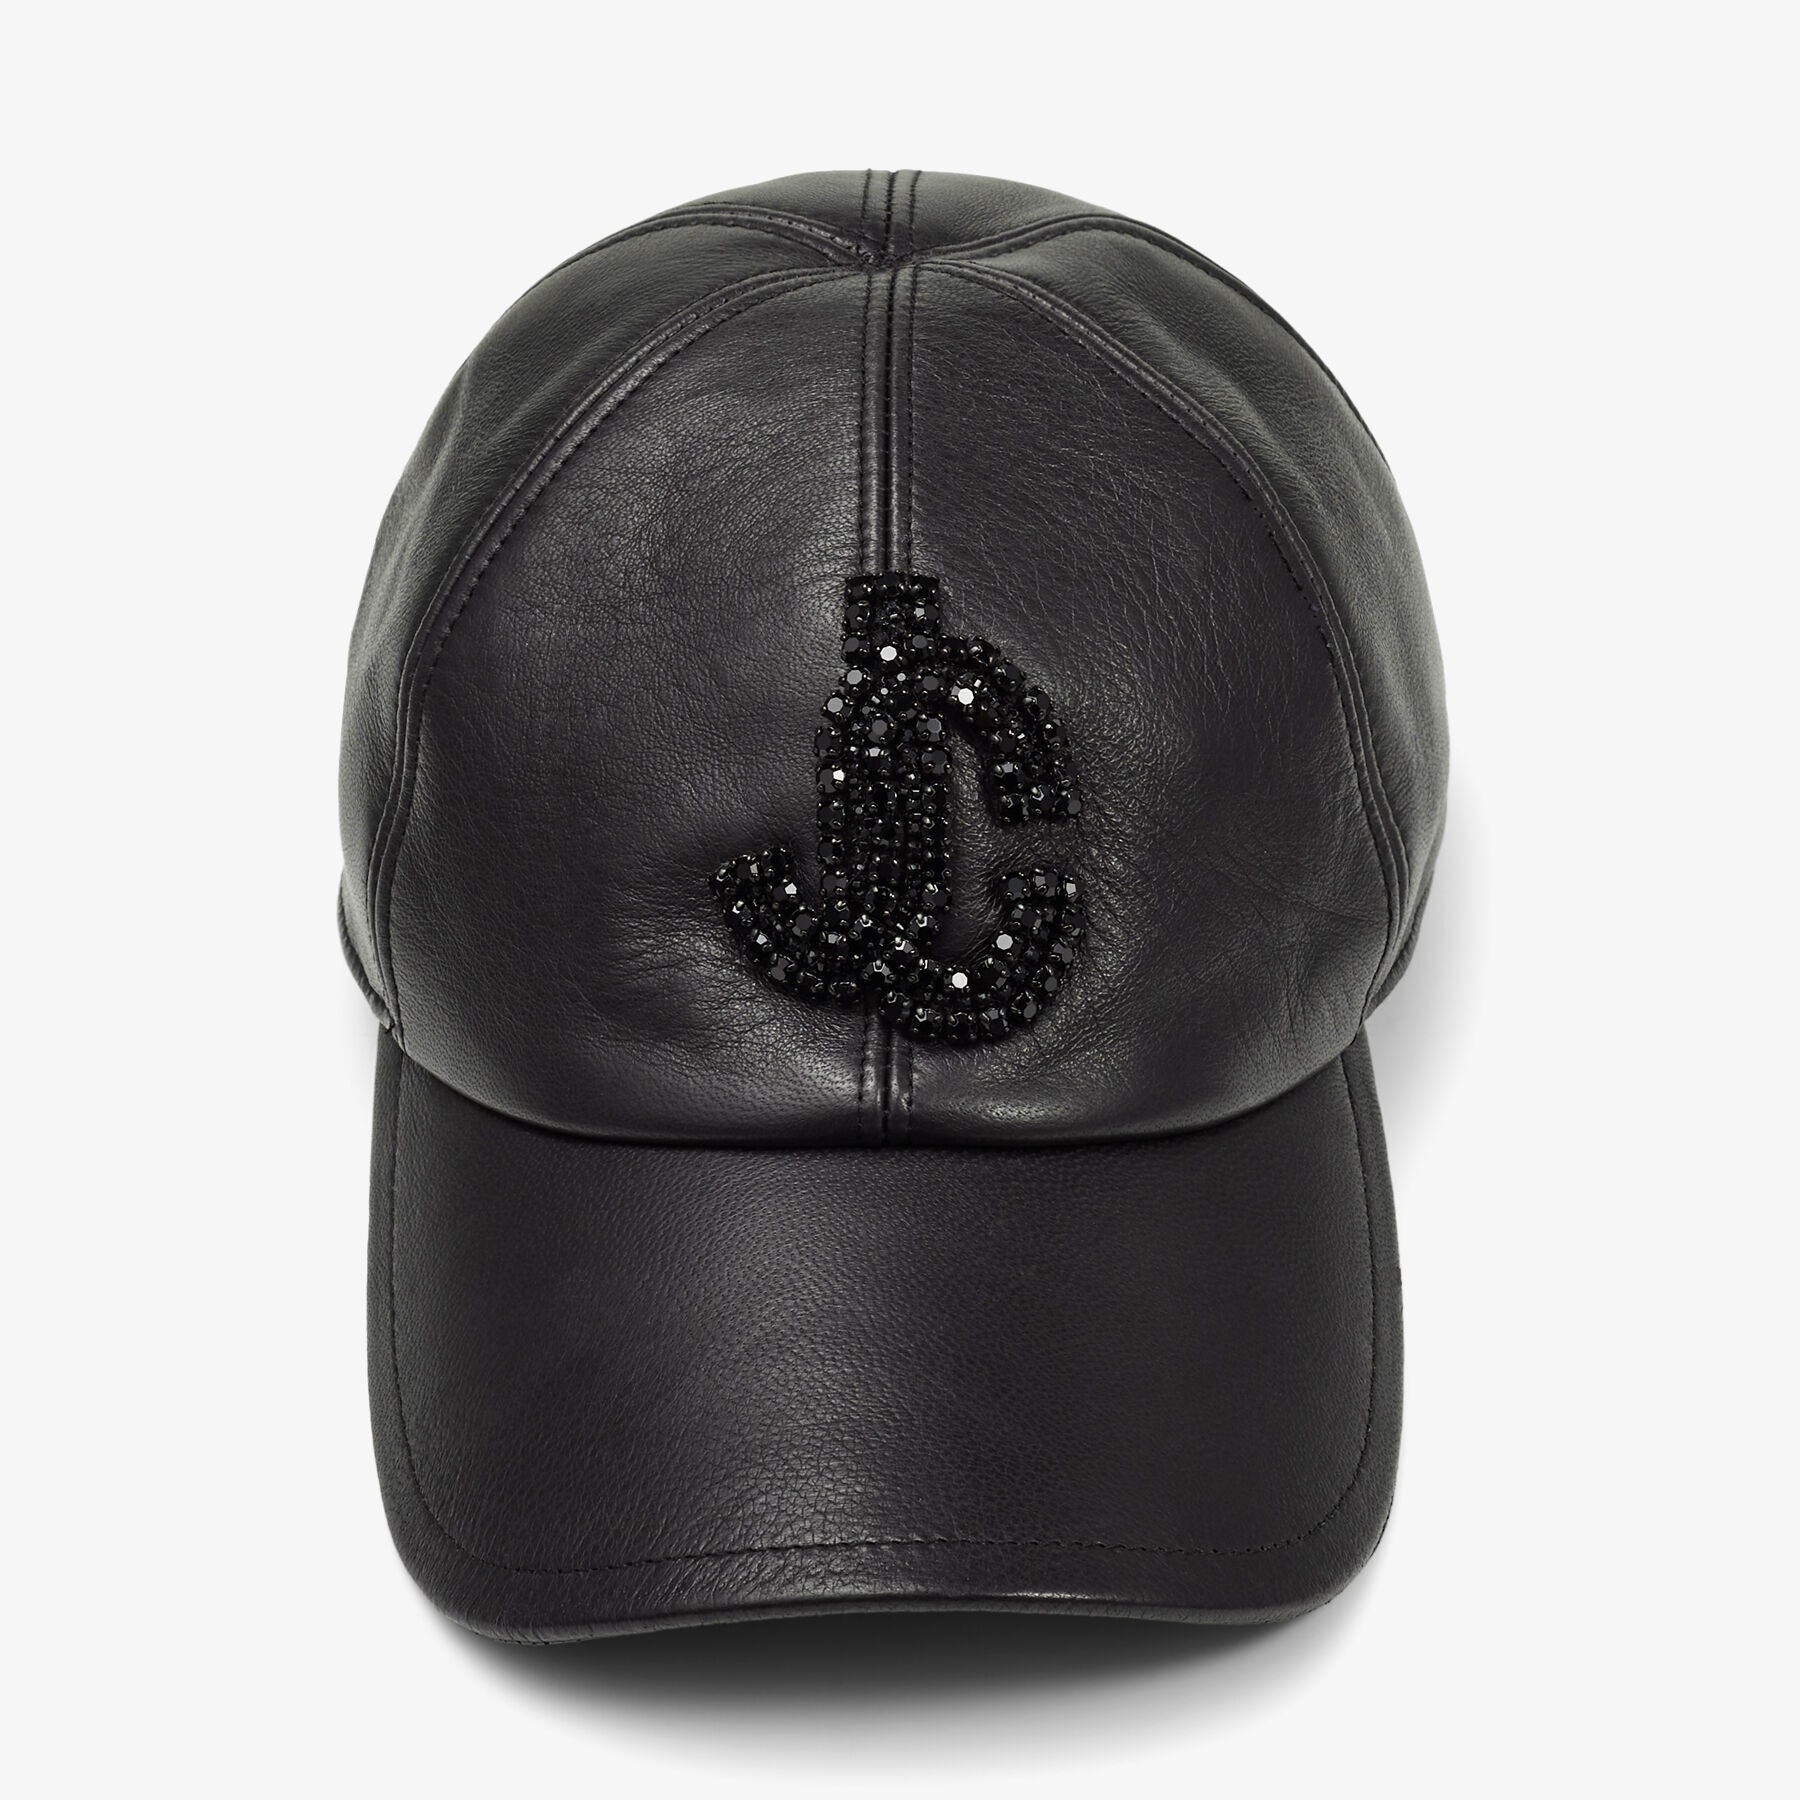 Saby
Black Leather Baseball Cap with Crystal JC Logo - 1